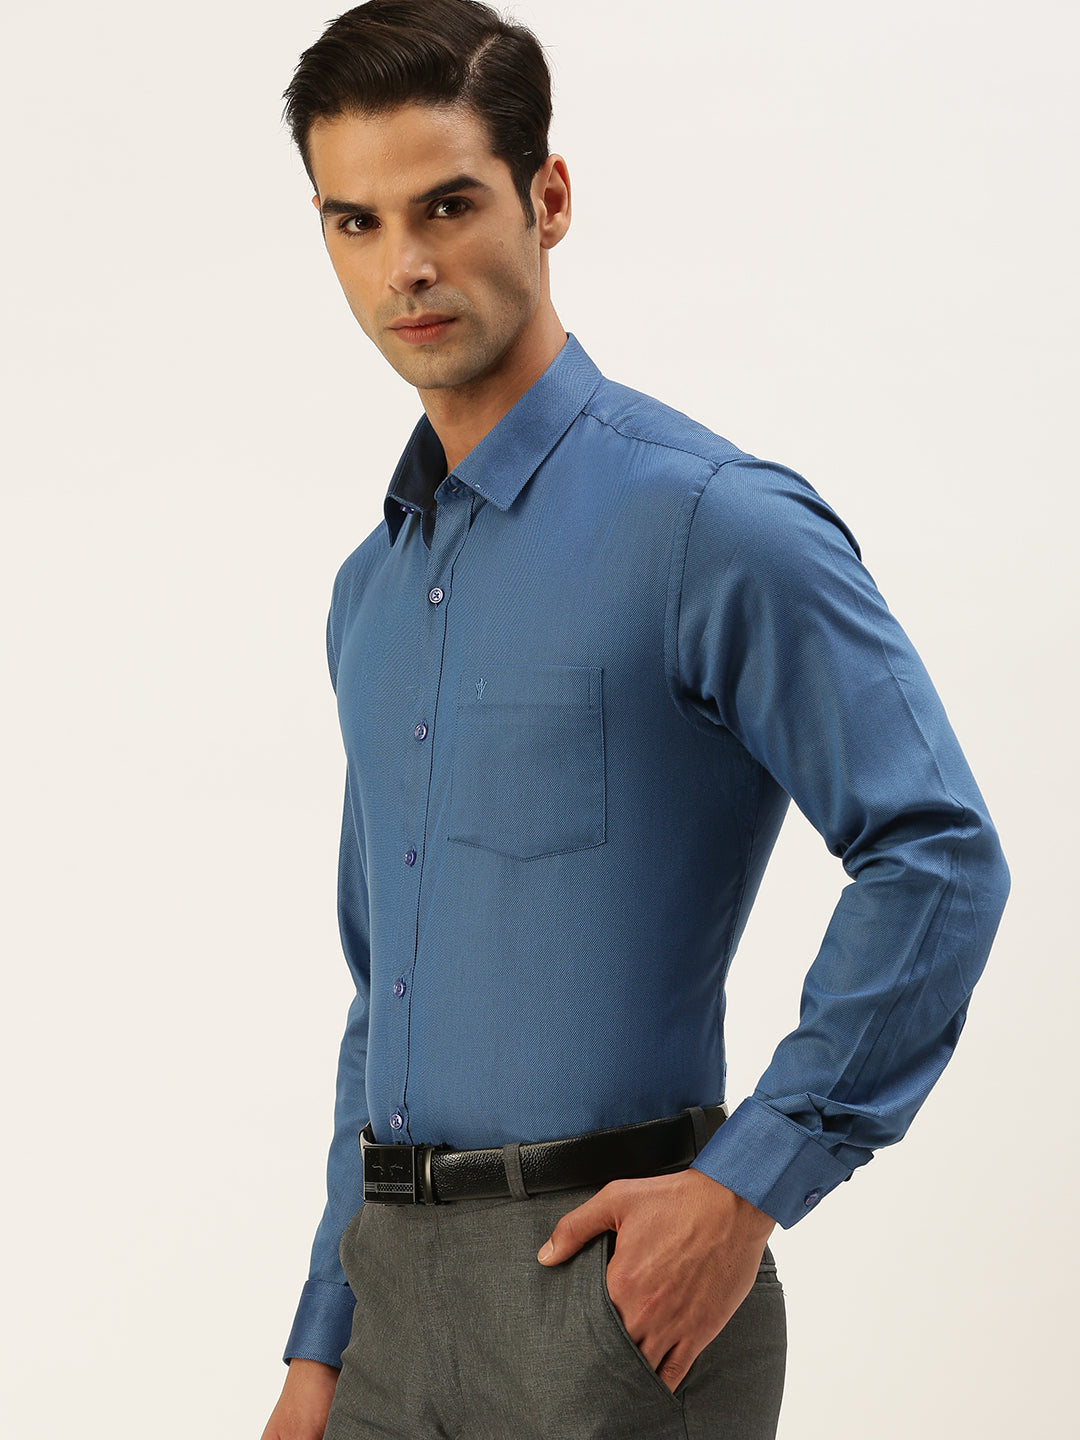 Mens Cotton Formal Shirt Full Sleeves Blue TF7-Side view